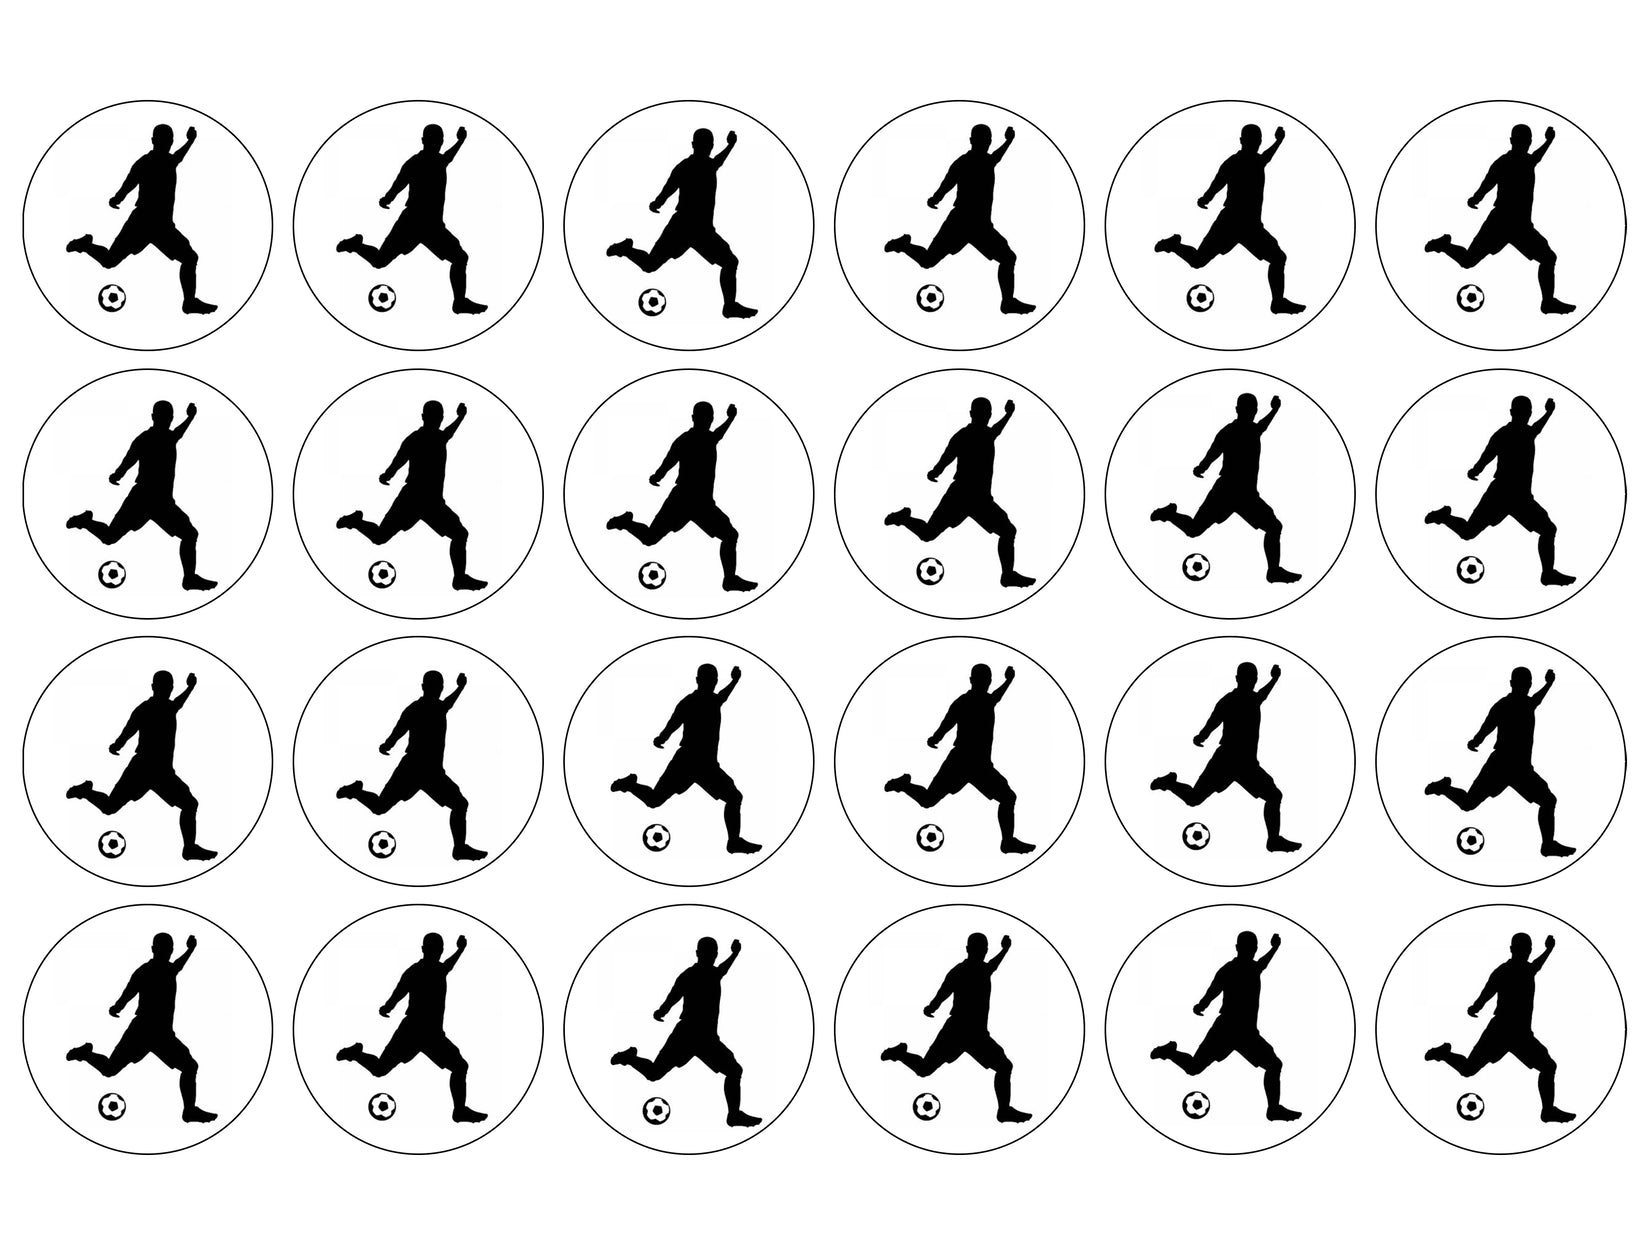 Soccer Kick Silhouette and Soccer Ball Edible Cupcake Topper Images ABPID55989